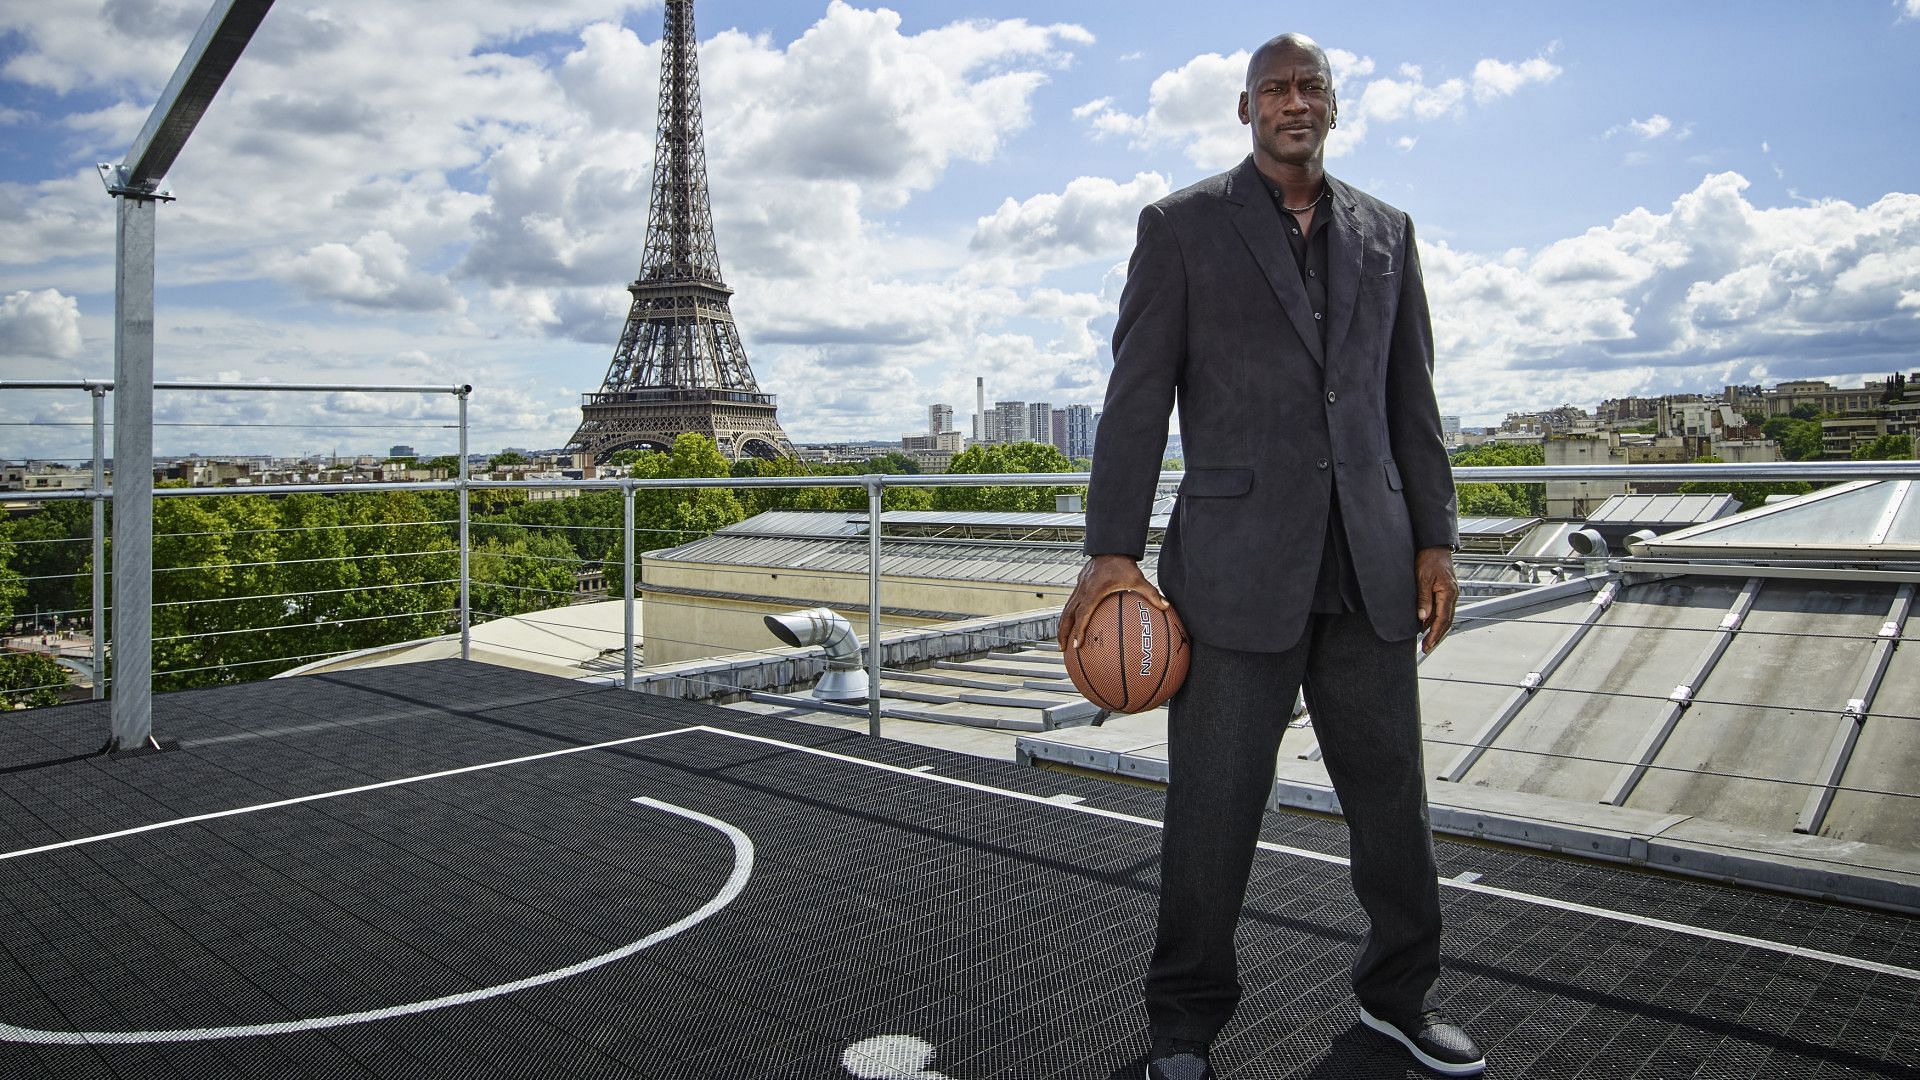 Michael Jordan is one of the richest NBA players